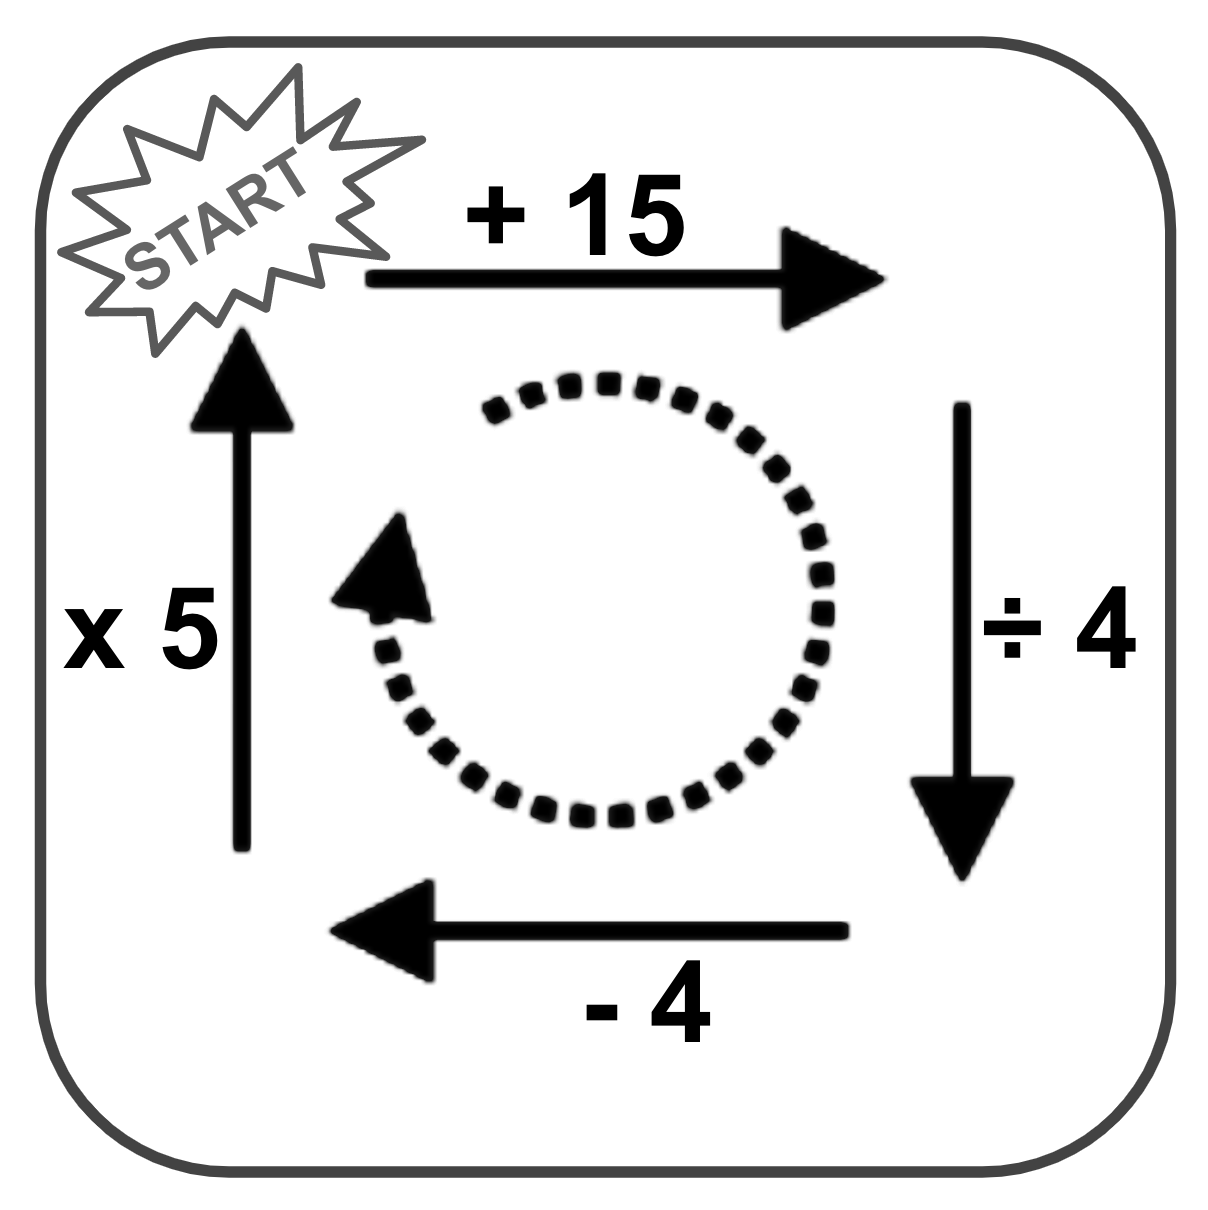 A "Stay the Same Puzzle" consisting of a large square outline containing a starting point in the top left corner, and four arrows labelled with math operations, leading back to the starting point. The first arrow is labelled +15, the second arrow is labelled /4, the third arrow is labelled -4, and the fourth arrow is labelled x5.